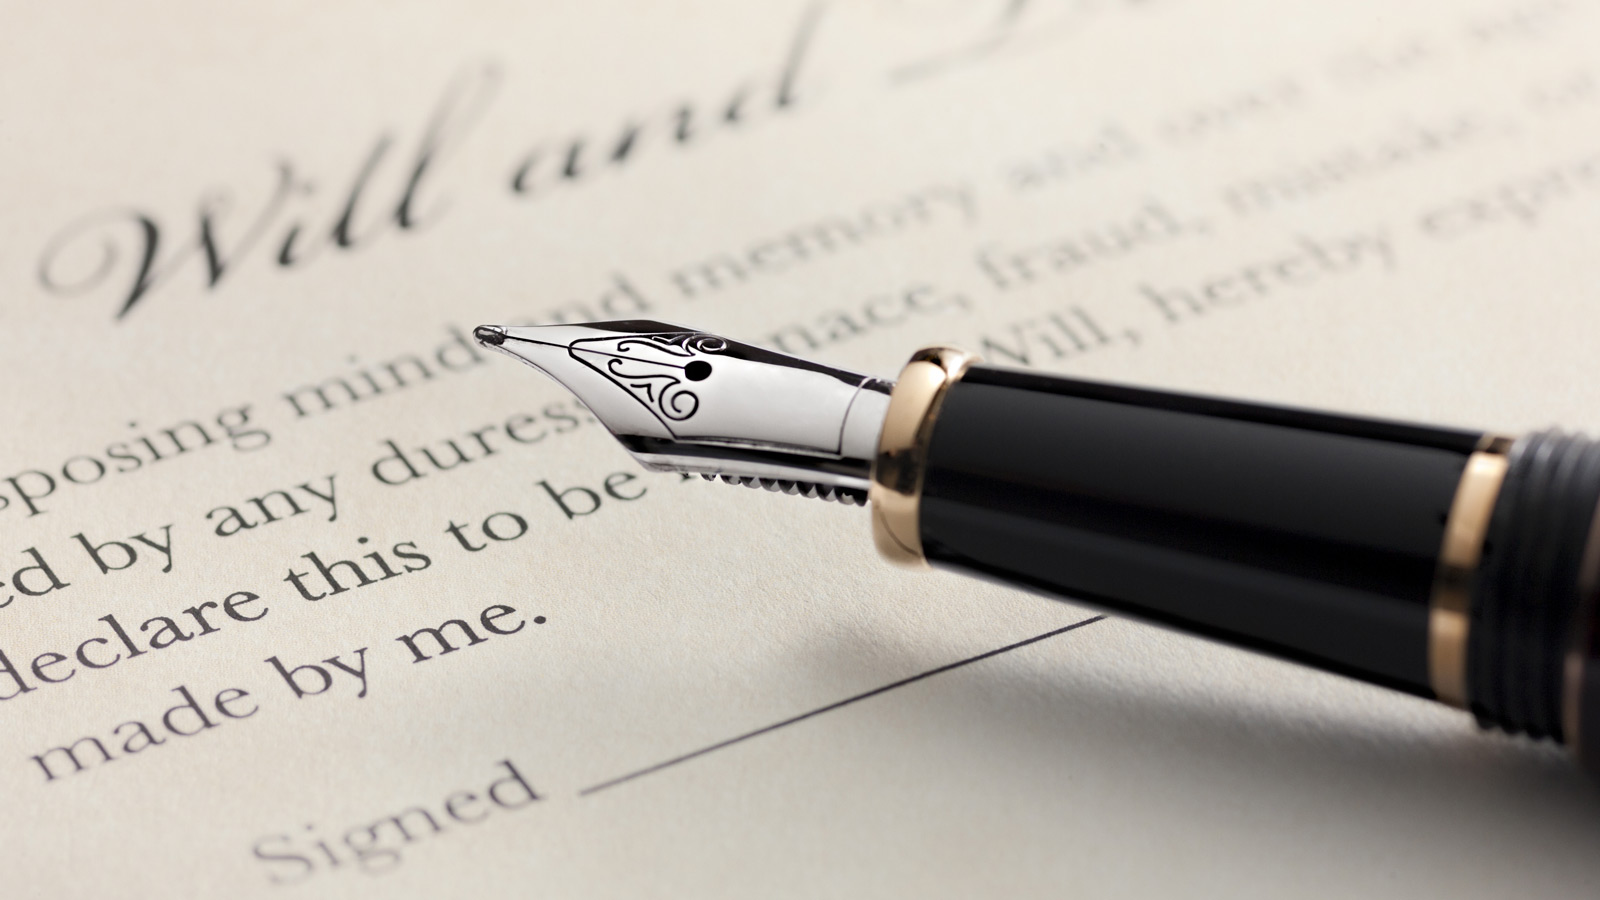 An image of a fountain pen with a will in the background. Will and foreign inheritance laws